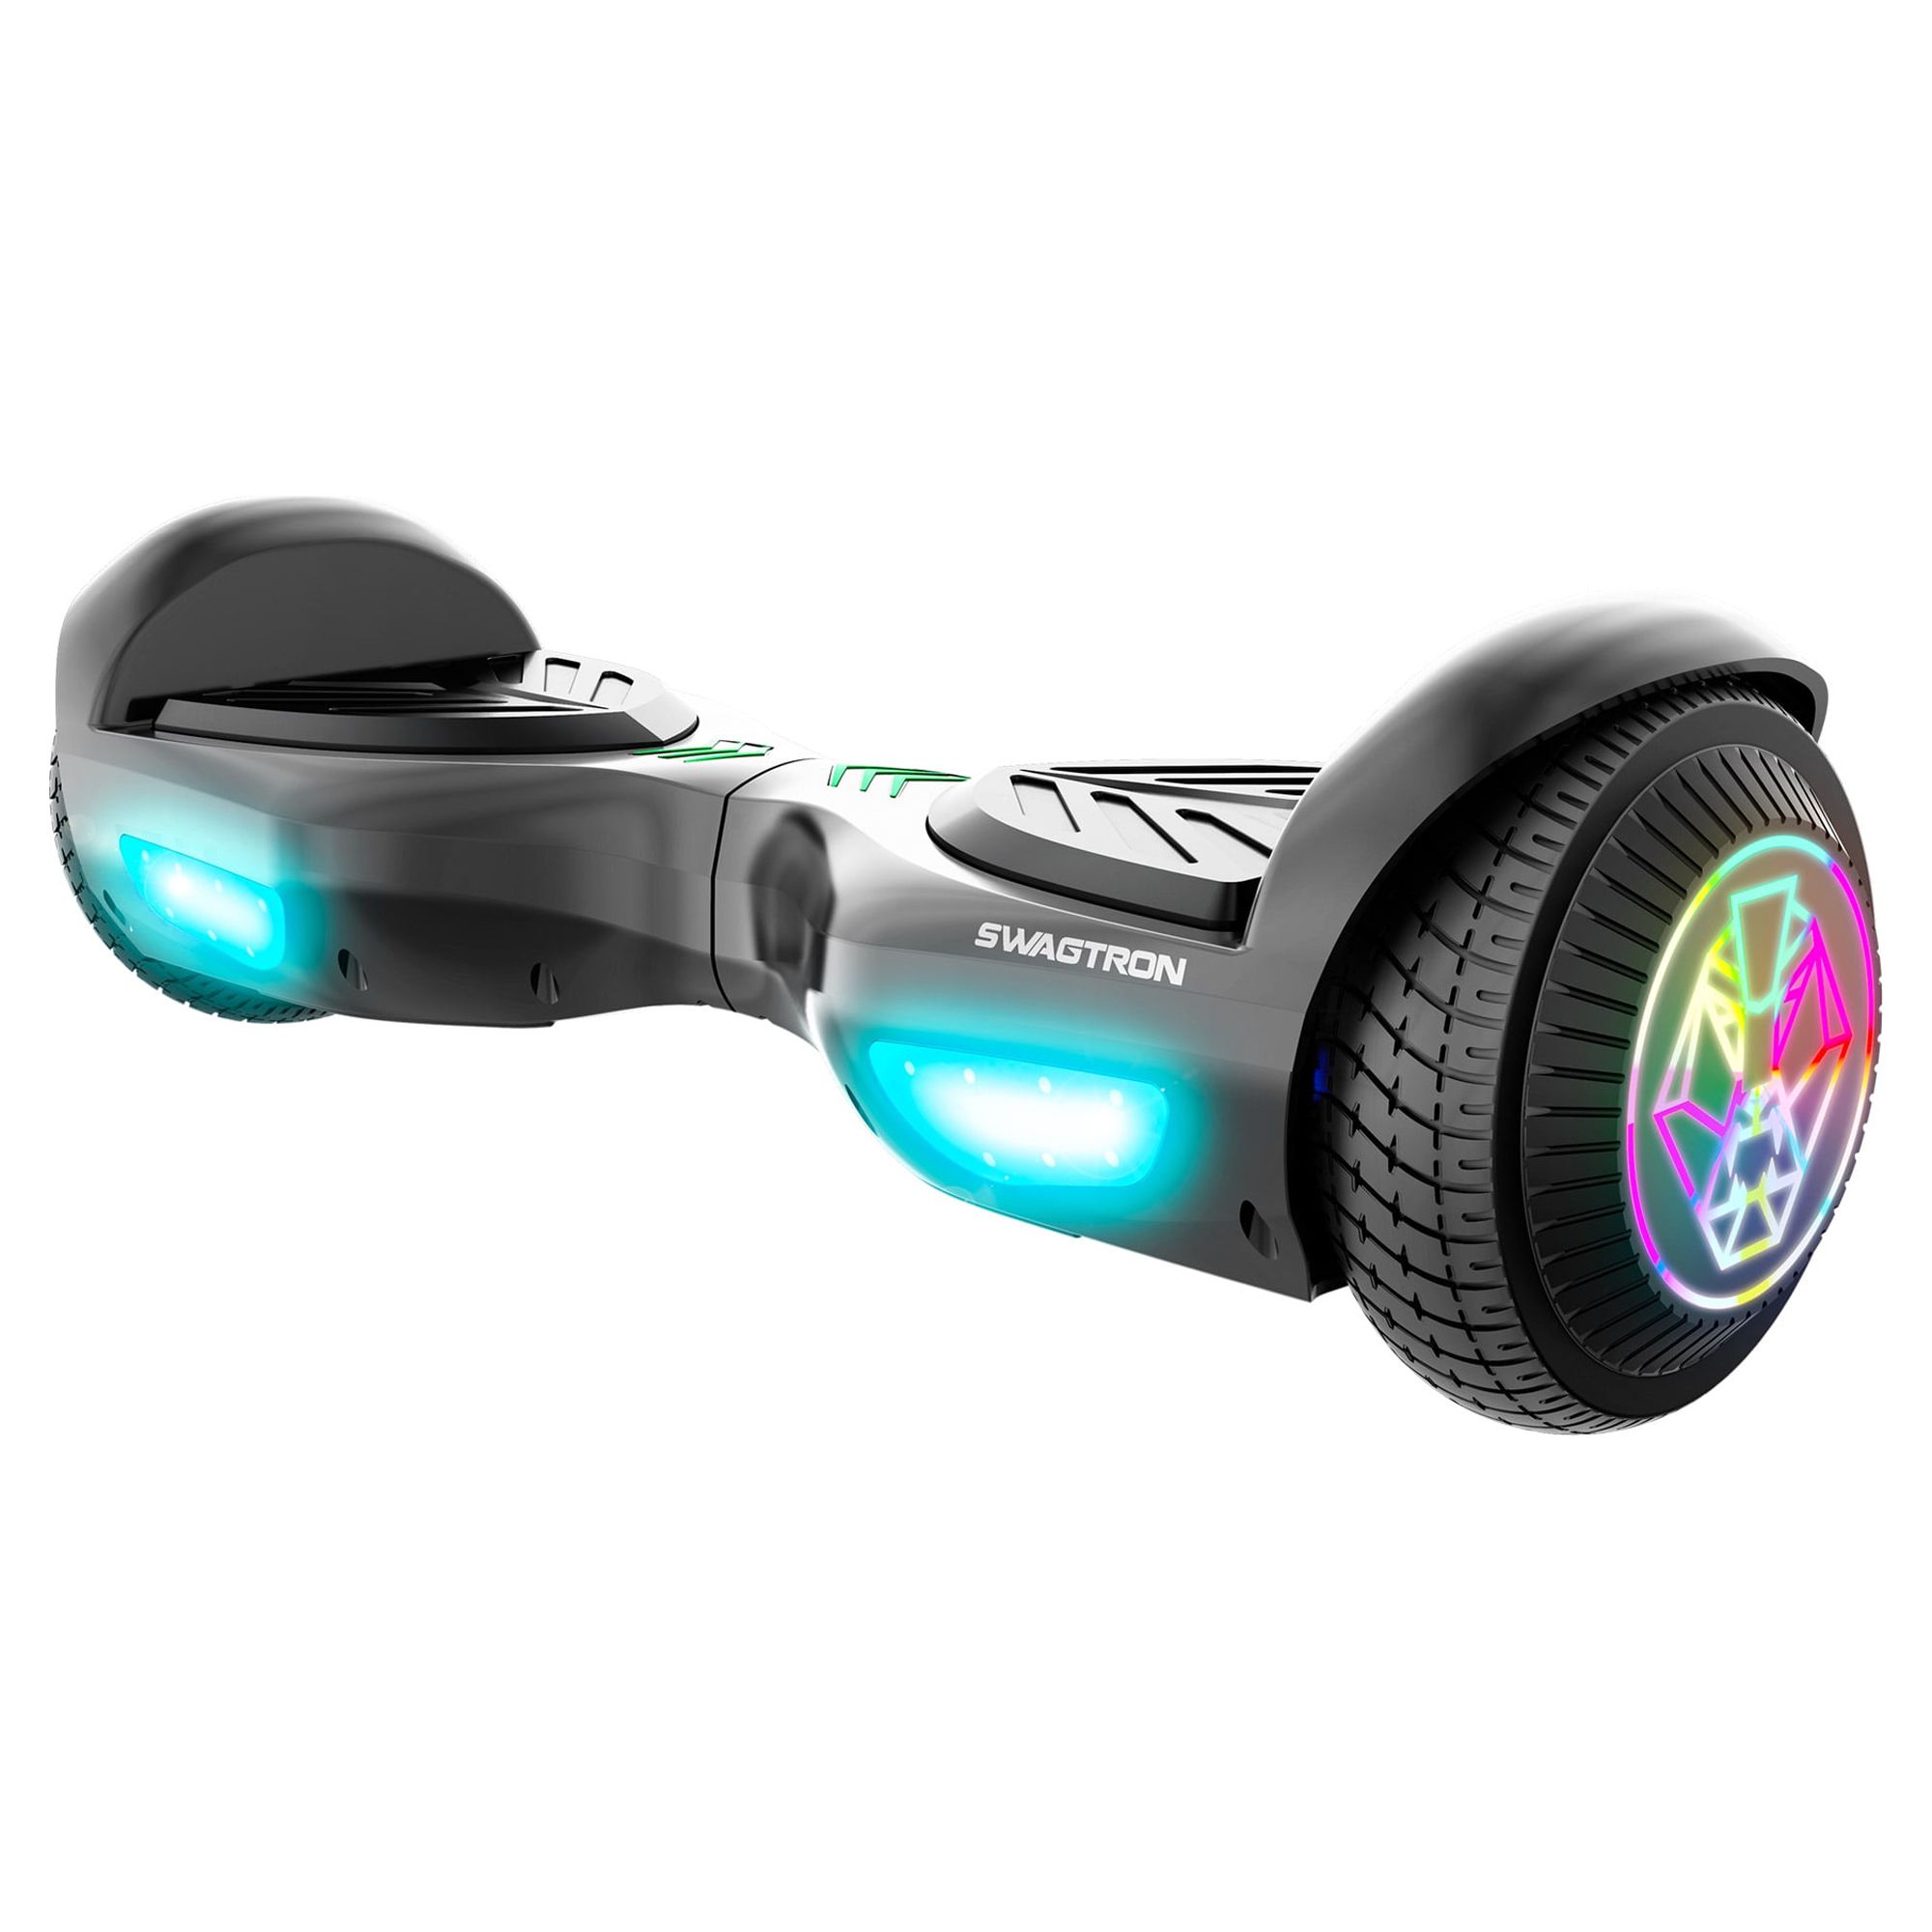 Swagtron Swag BOARD EVO V2 Hoverboard with Light-Up Wheels & Balance Assist, Exclusive UL-Compliant Life Po™ Battery Tech - image 1 of 8